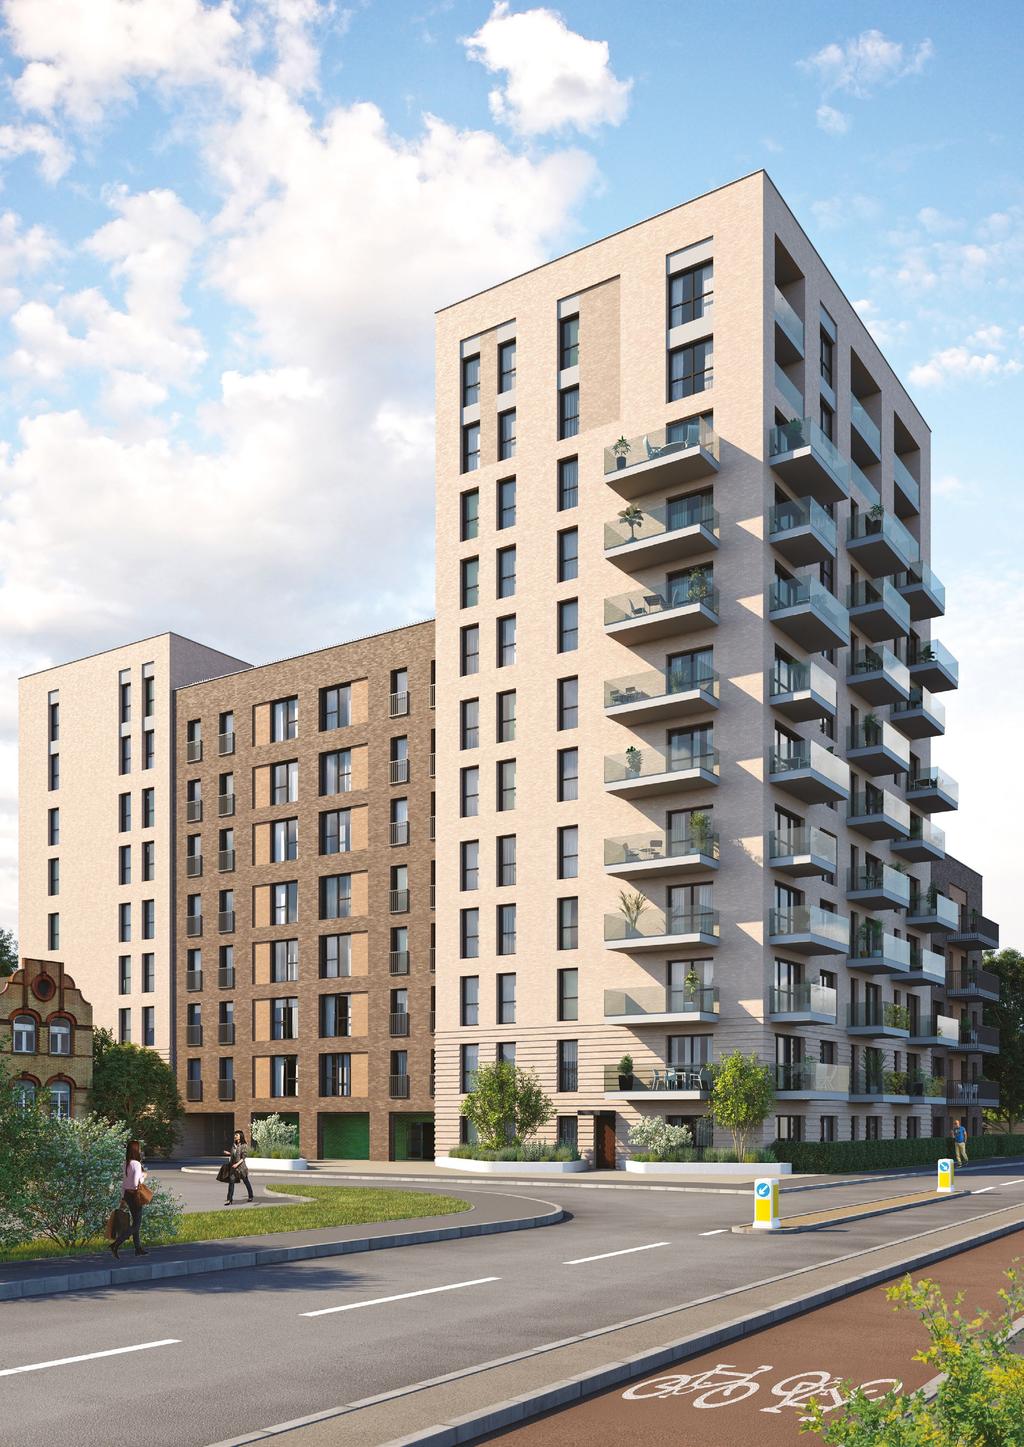 GREENVIEW COURT West London s newest destination for luxury living THE DEVELOPMENT Three private landscaped rooftop gardens at levels 5, 7 & 8 Secure undercroft car parking 1 Three independent